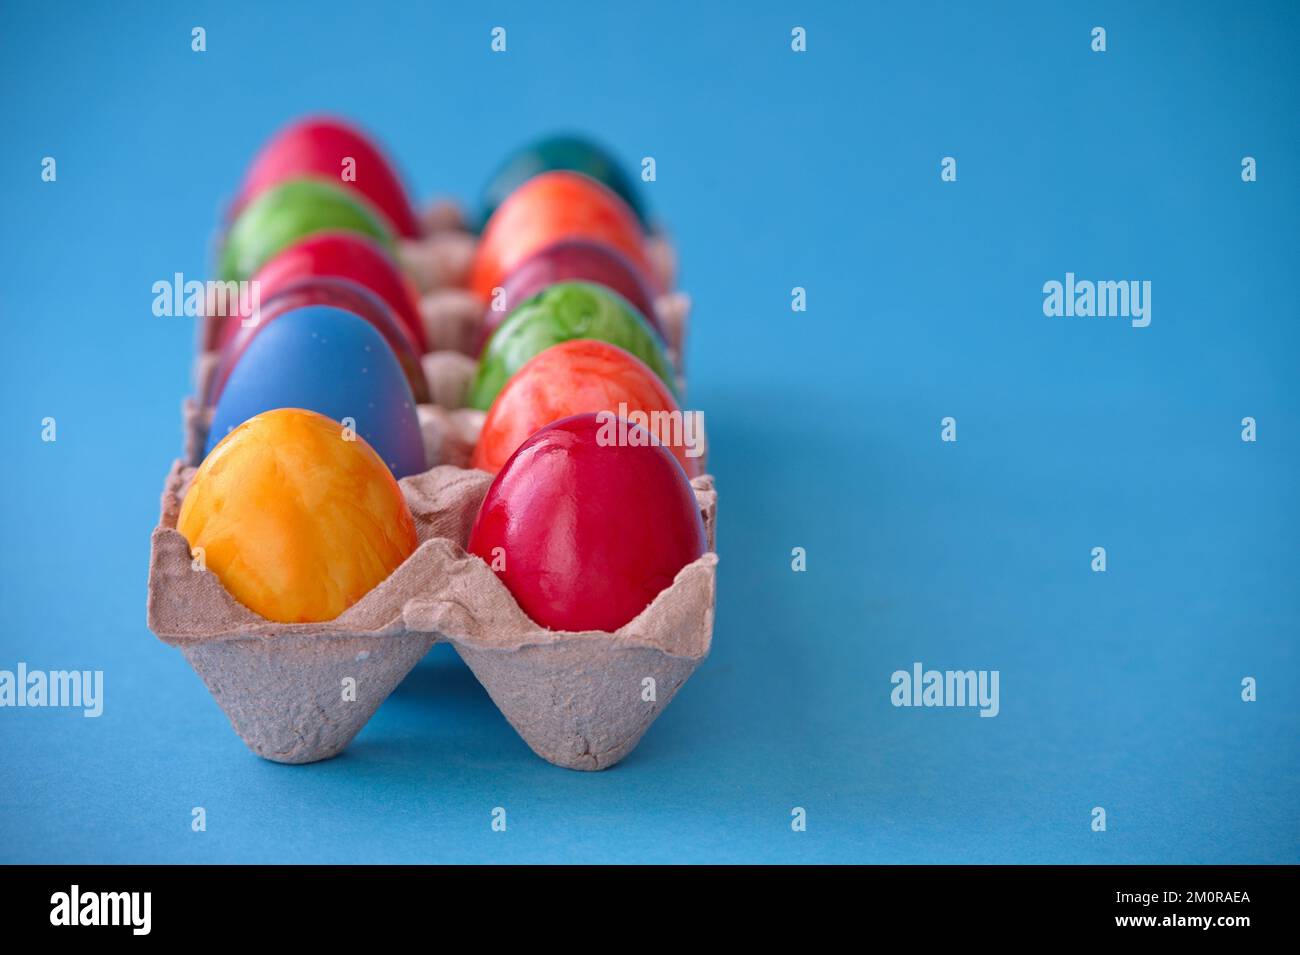 Colorful Easter eggs in cardboard box against blue background Stock Photo